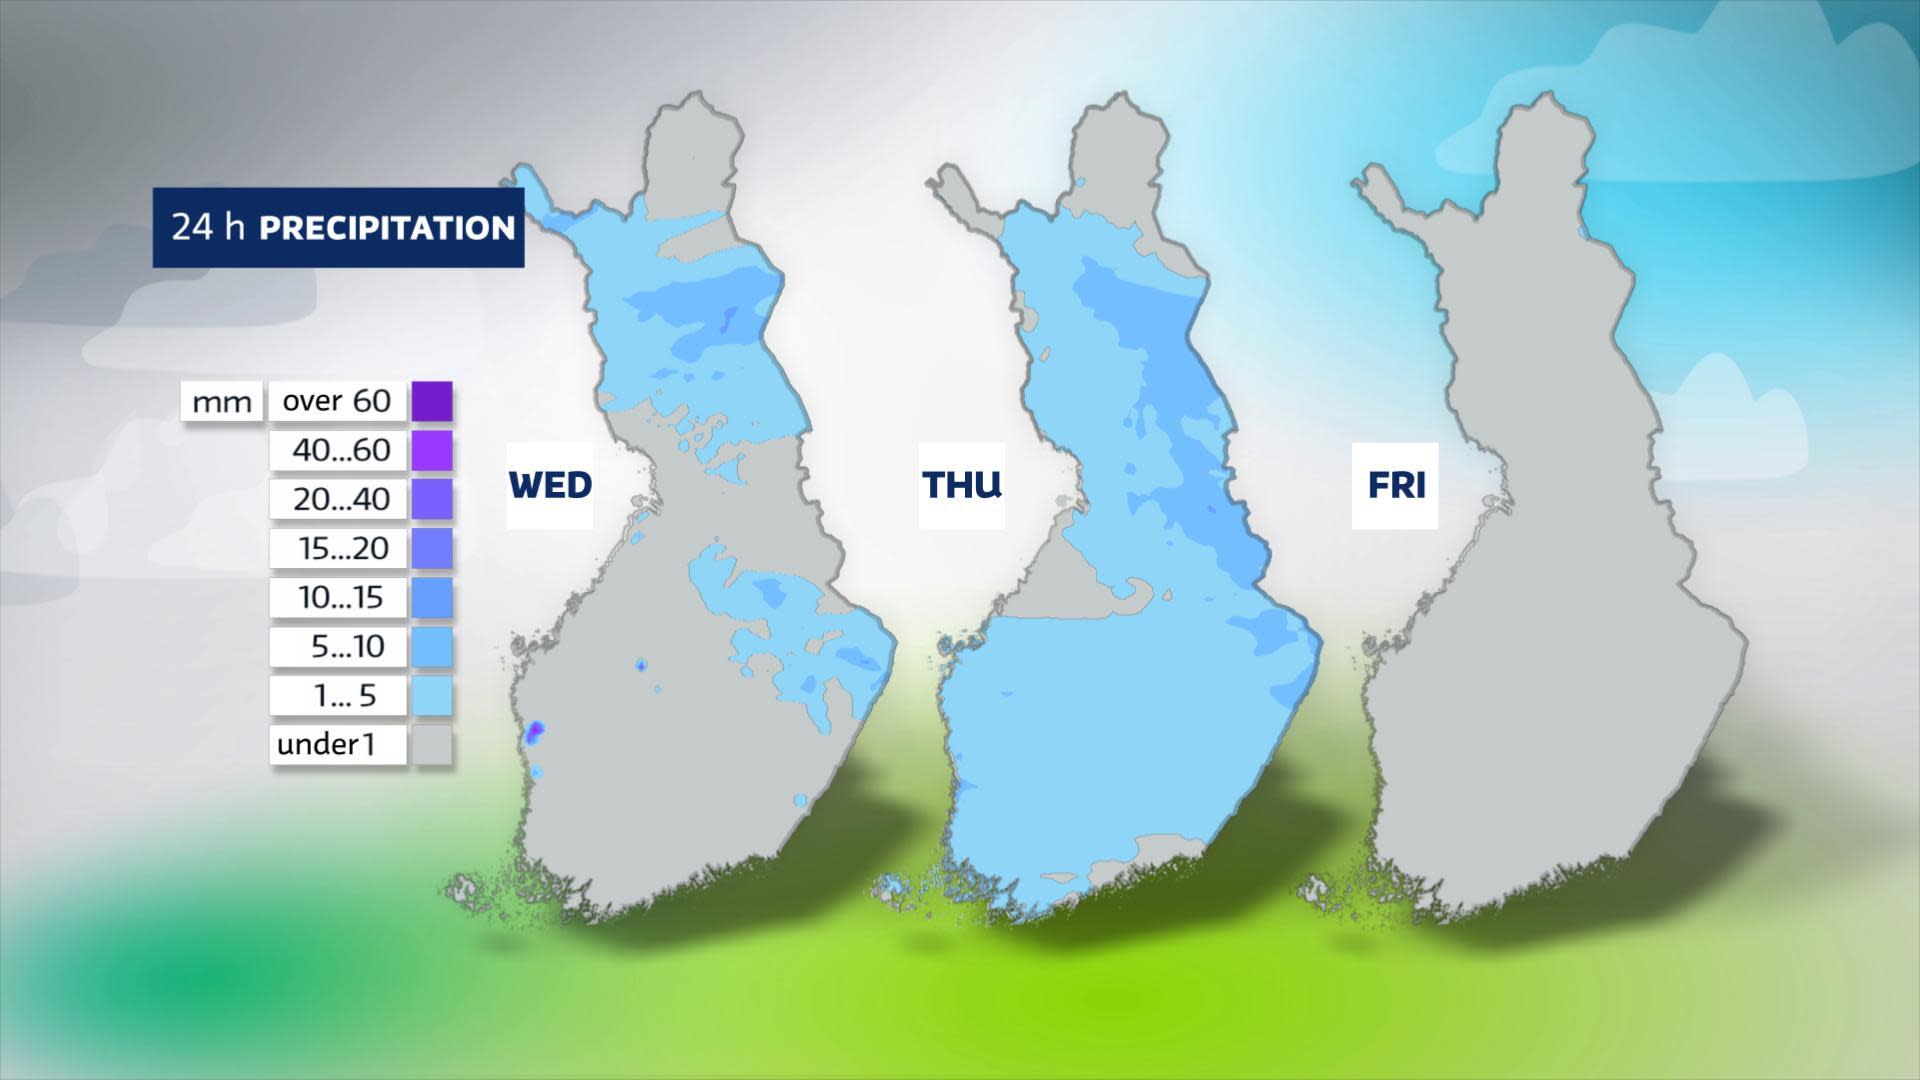 Rainy weather is expected in most of Finland on Thursday